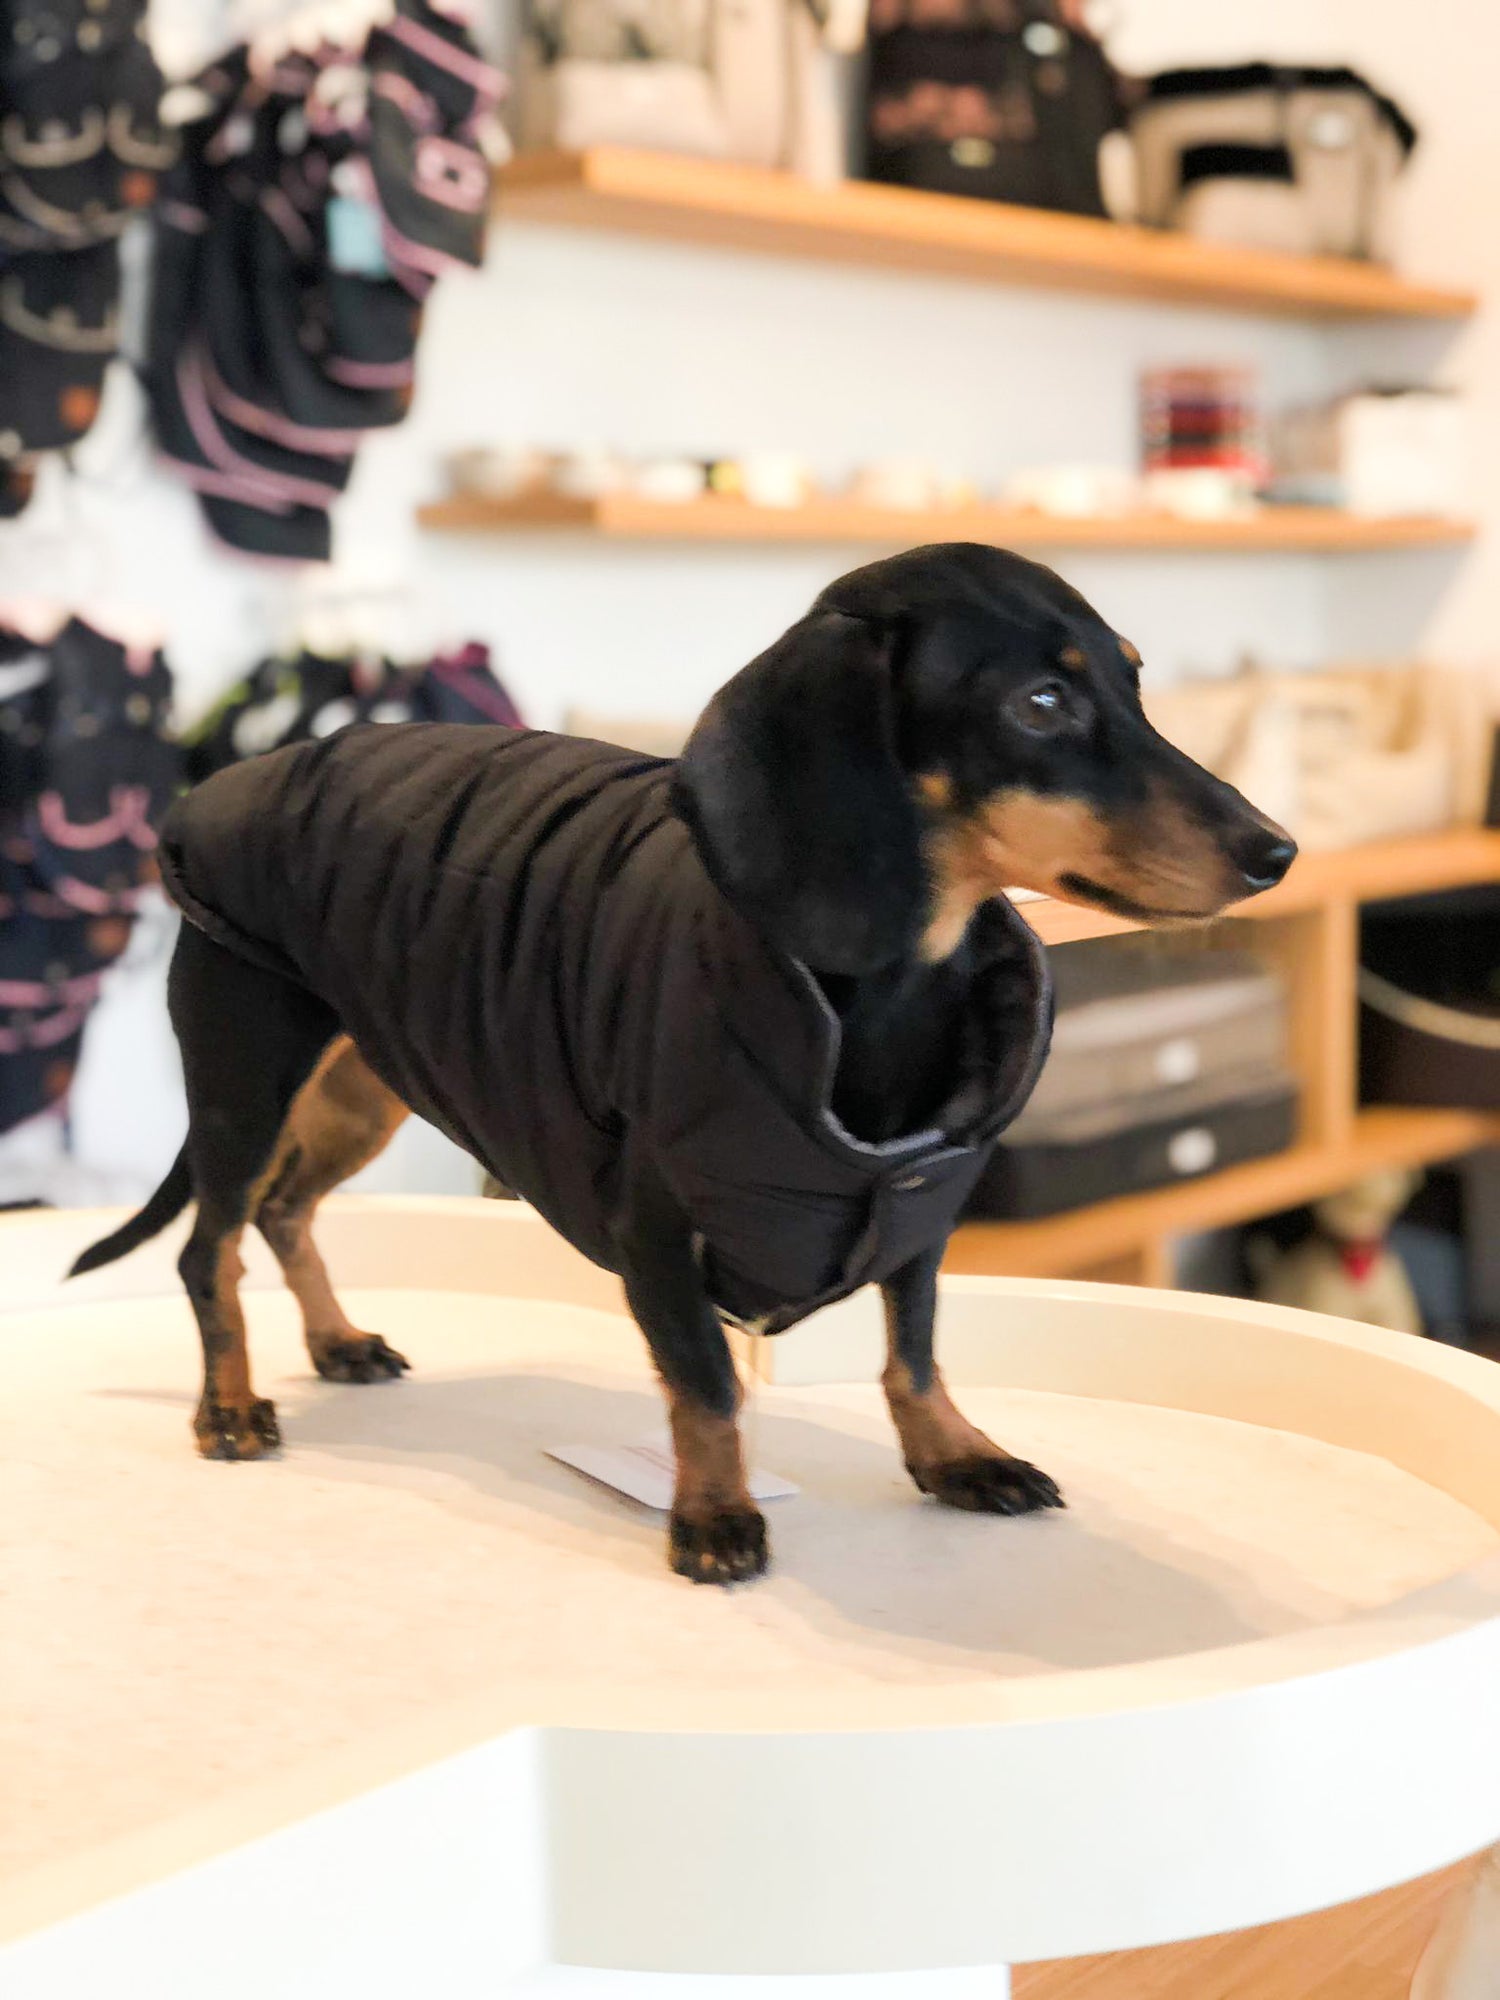 Frankfurt dog coat especially for dachshunds 2 in 1 (reversible)